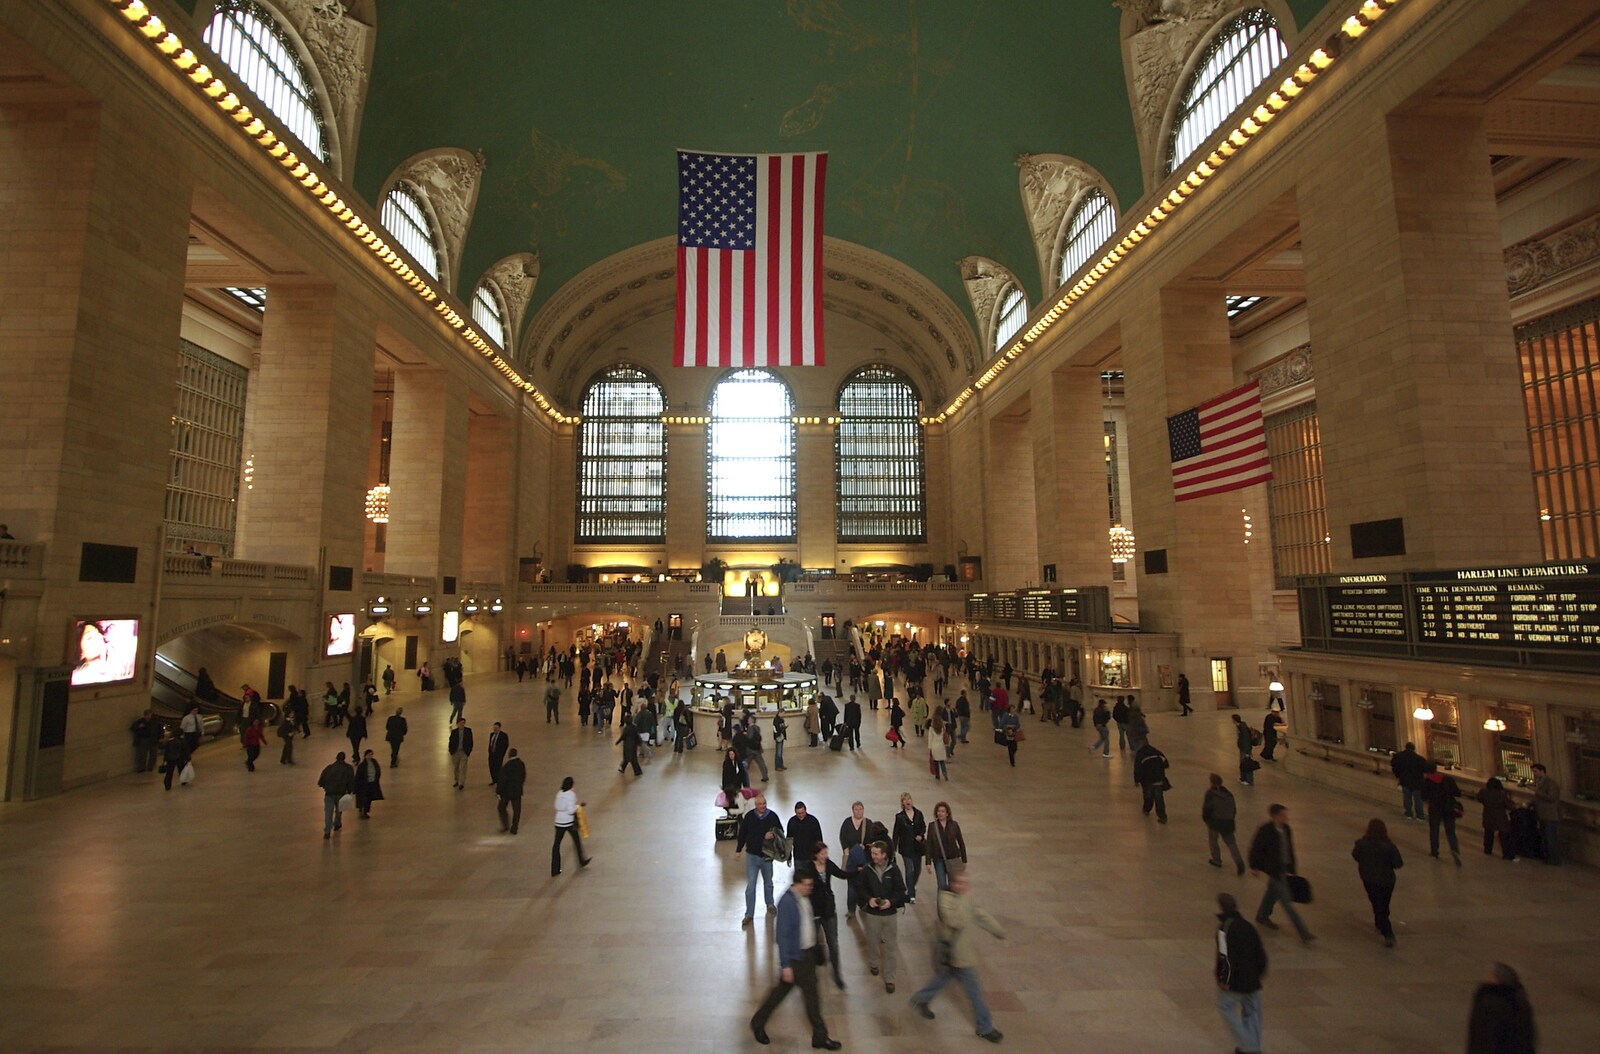 Persian Day Parade, Upper East Side and Midtown, New York, US - 25th March 2007: Another view of the Grand Central concourse